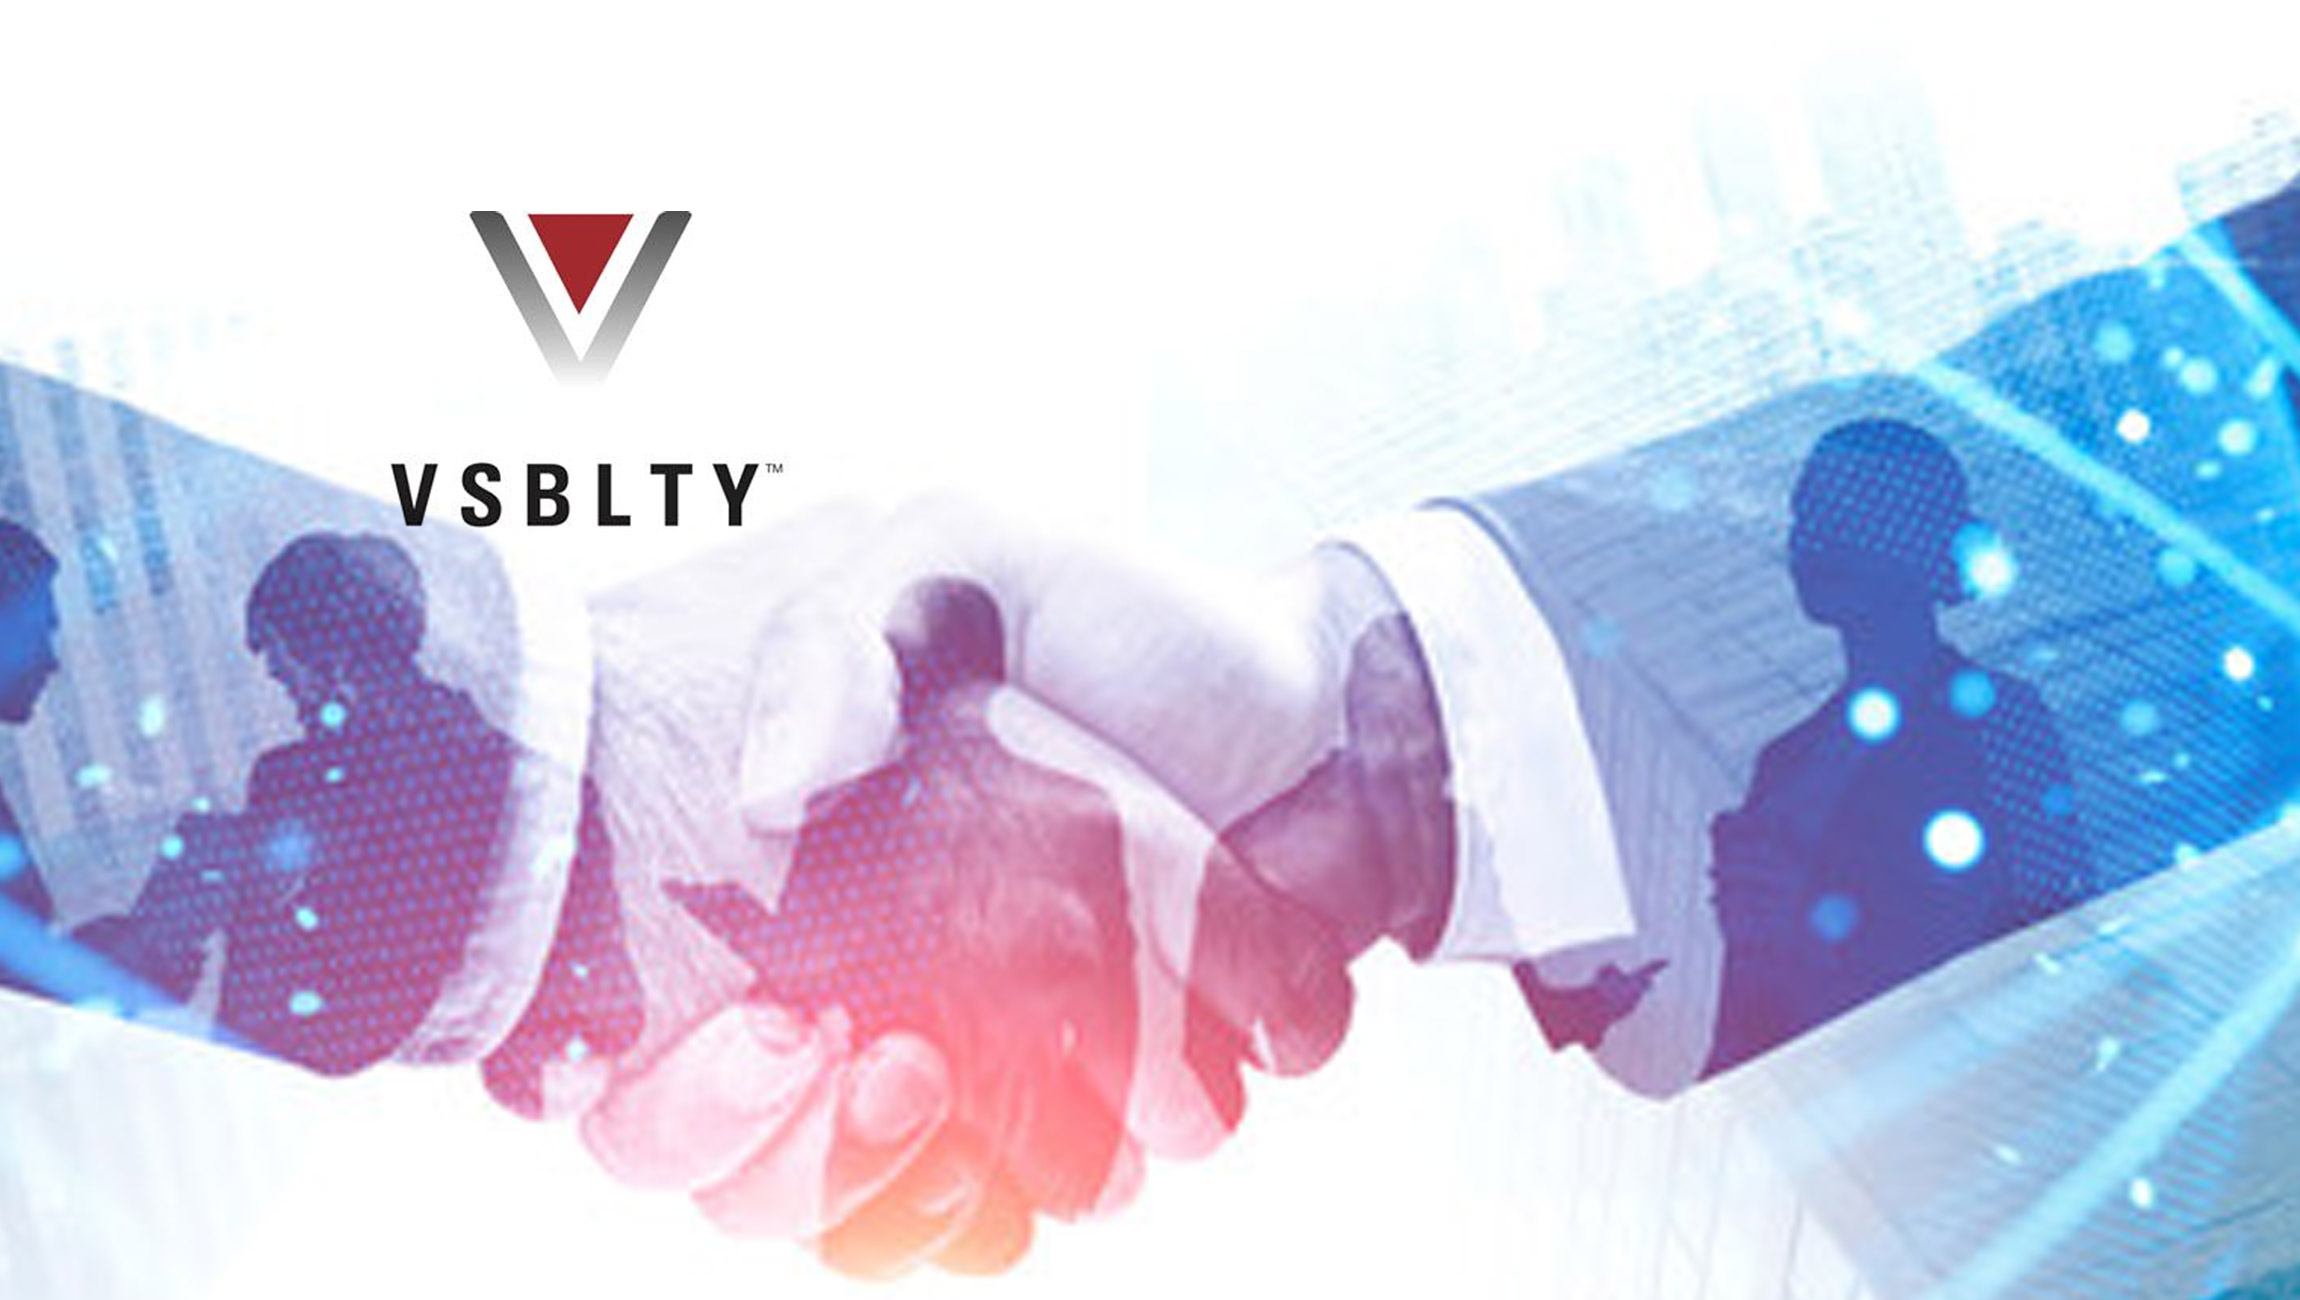 VSBLTY FORGES ALLIANCE WITH THE AL JABR GROUP TO BRING COMPUTER VISION & AI SECURITY SOLUTIONS TO THE MIDDLE EAST